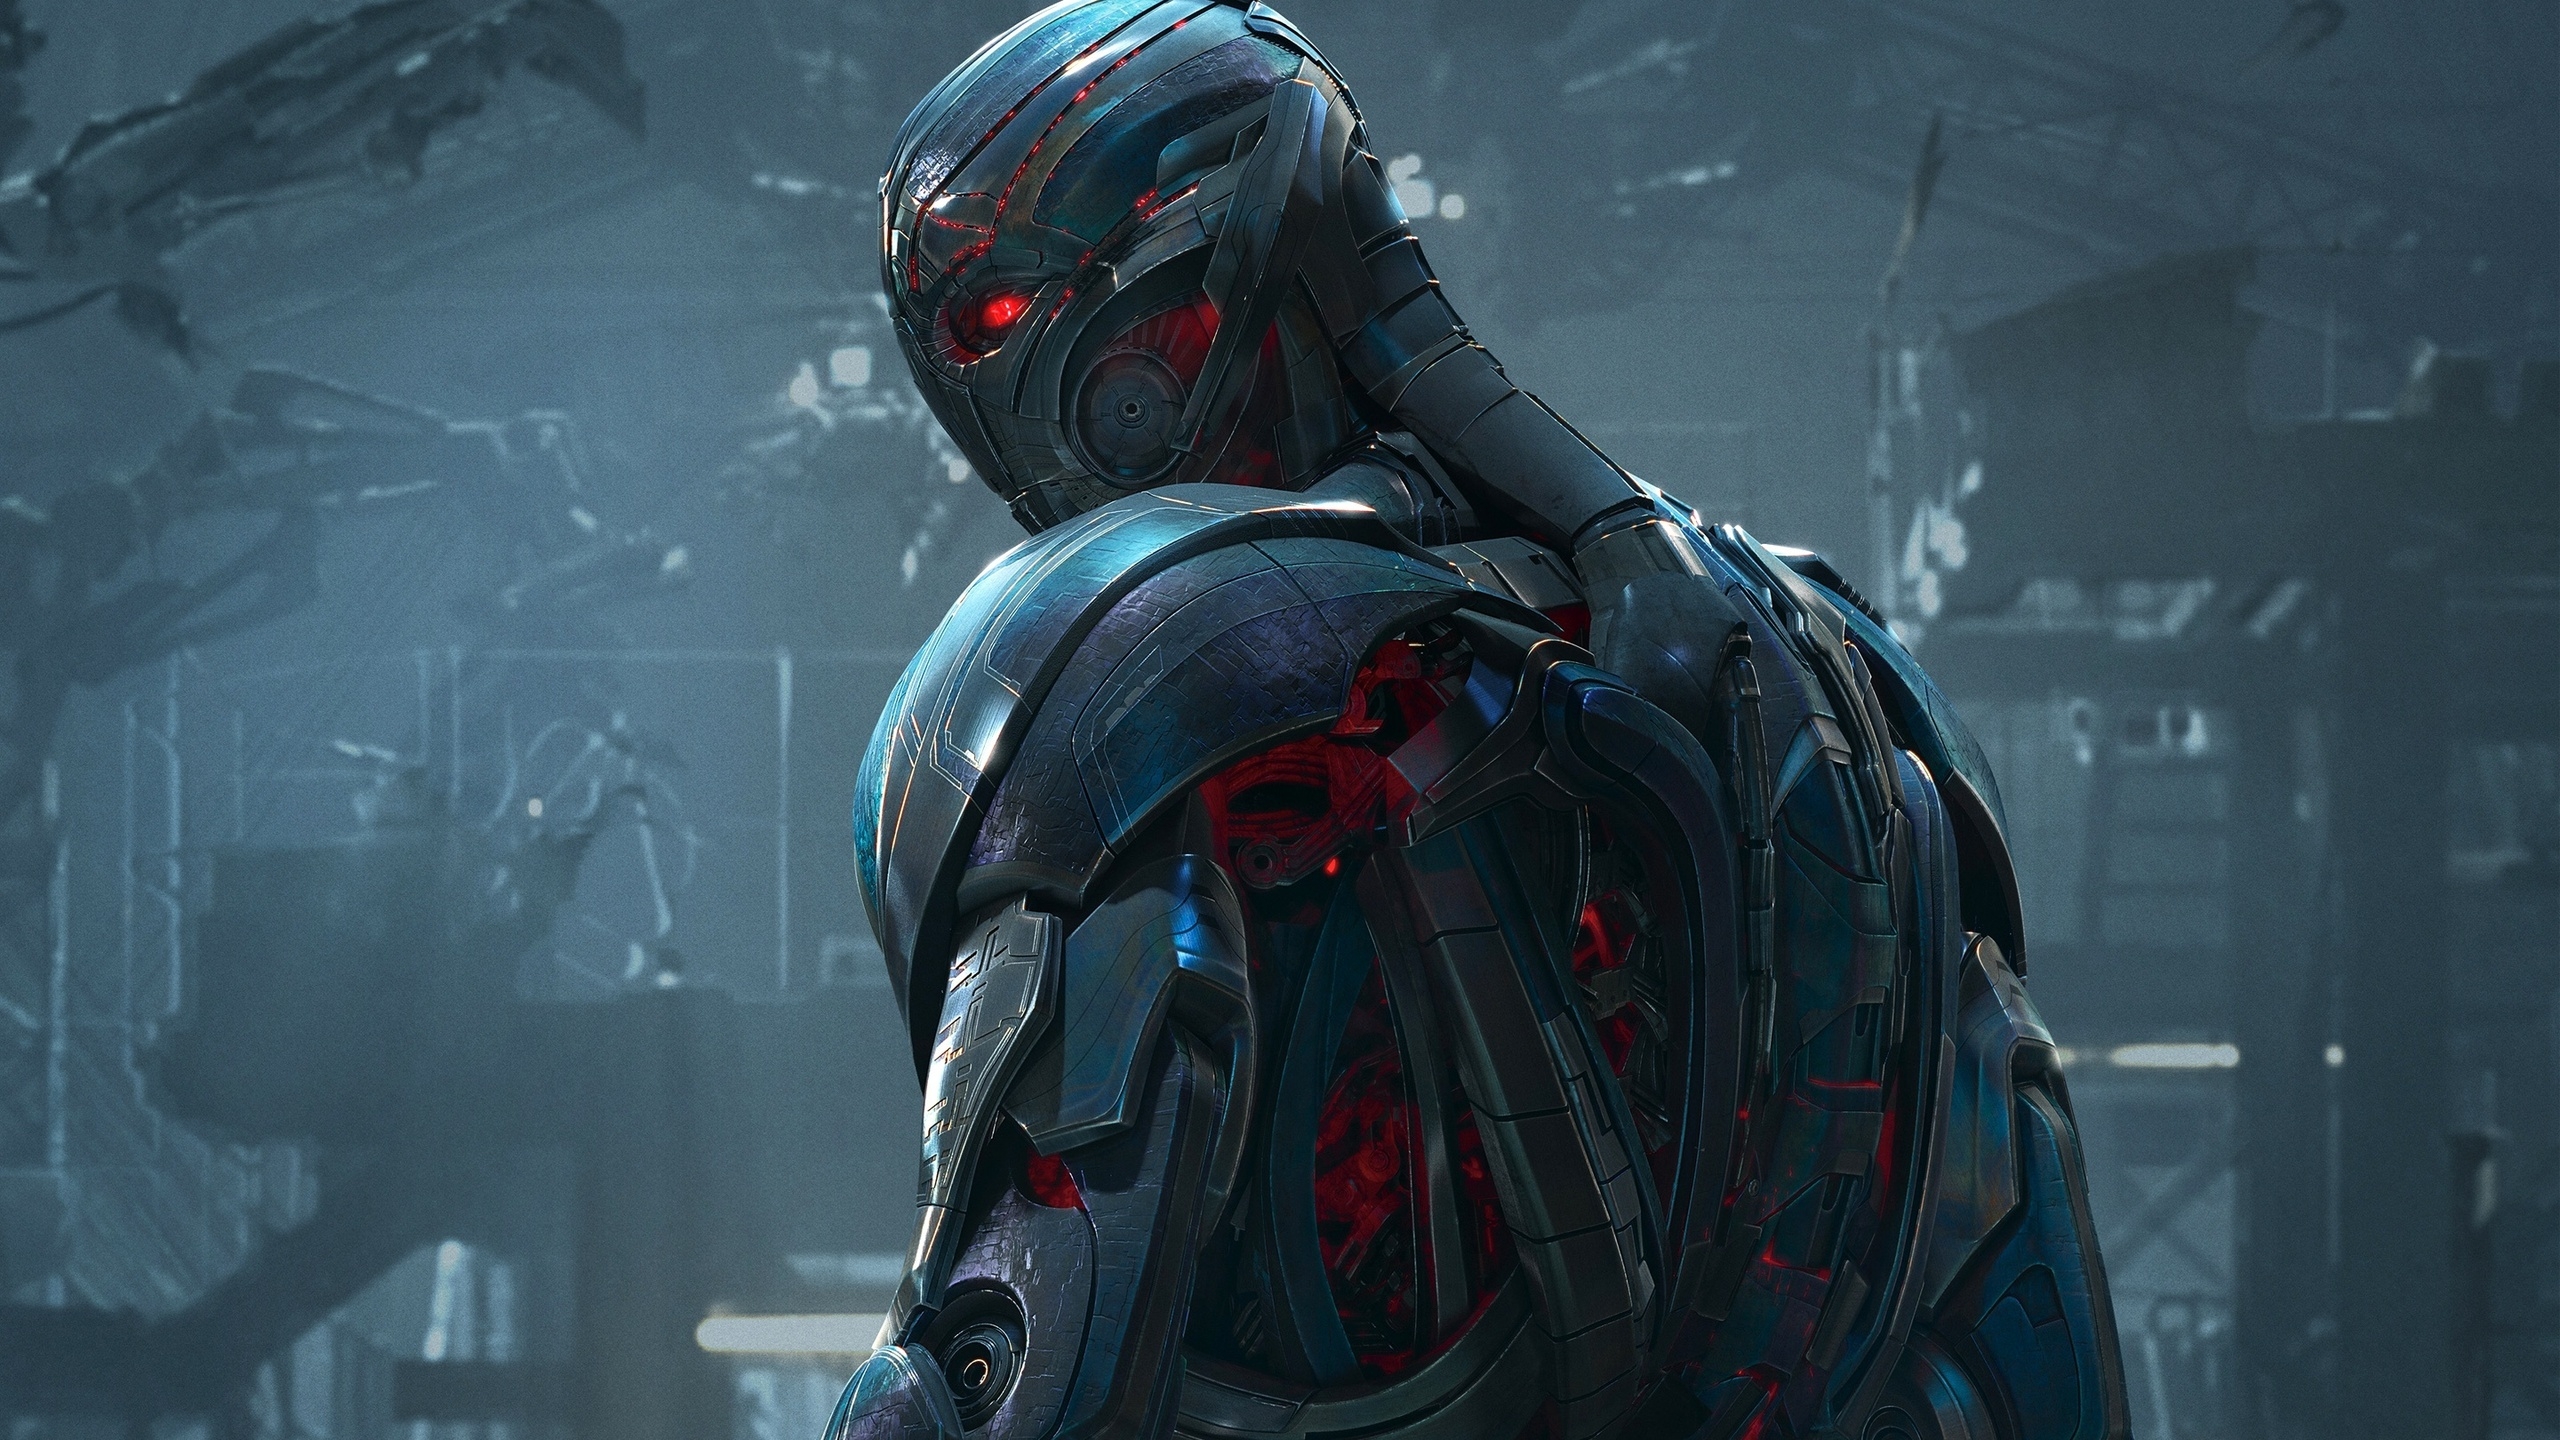 Ultron from Avengers for 2560x1440 HDTV resolution